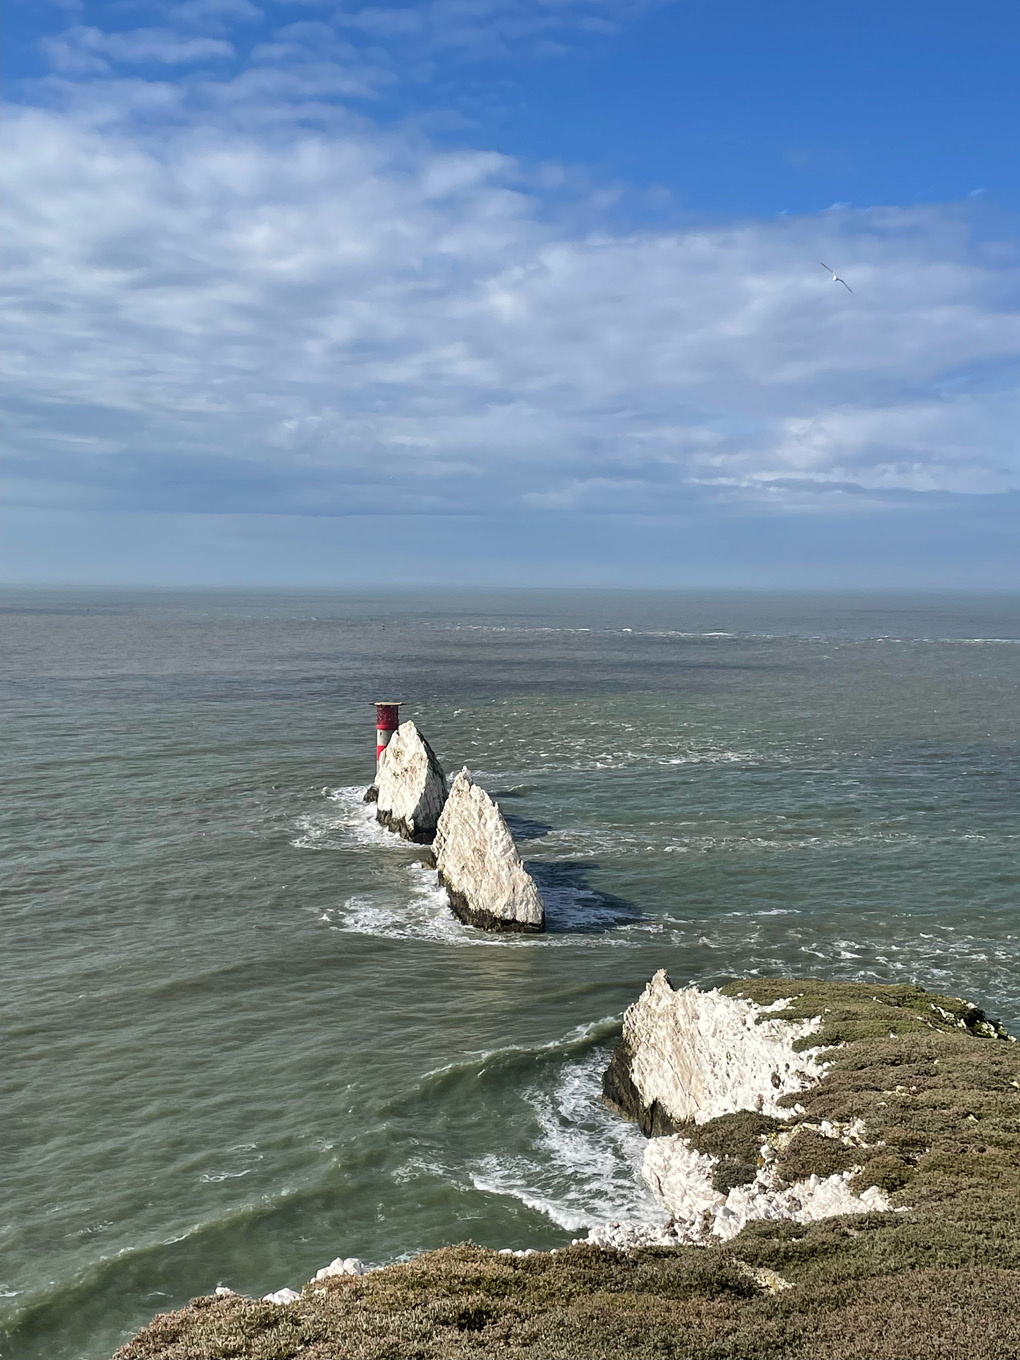 The sea and a chalk cliff outcrop with a lighthouse at the end